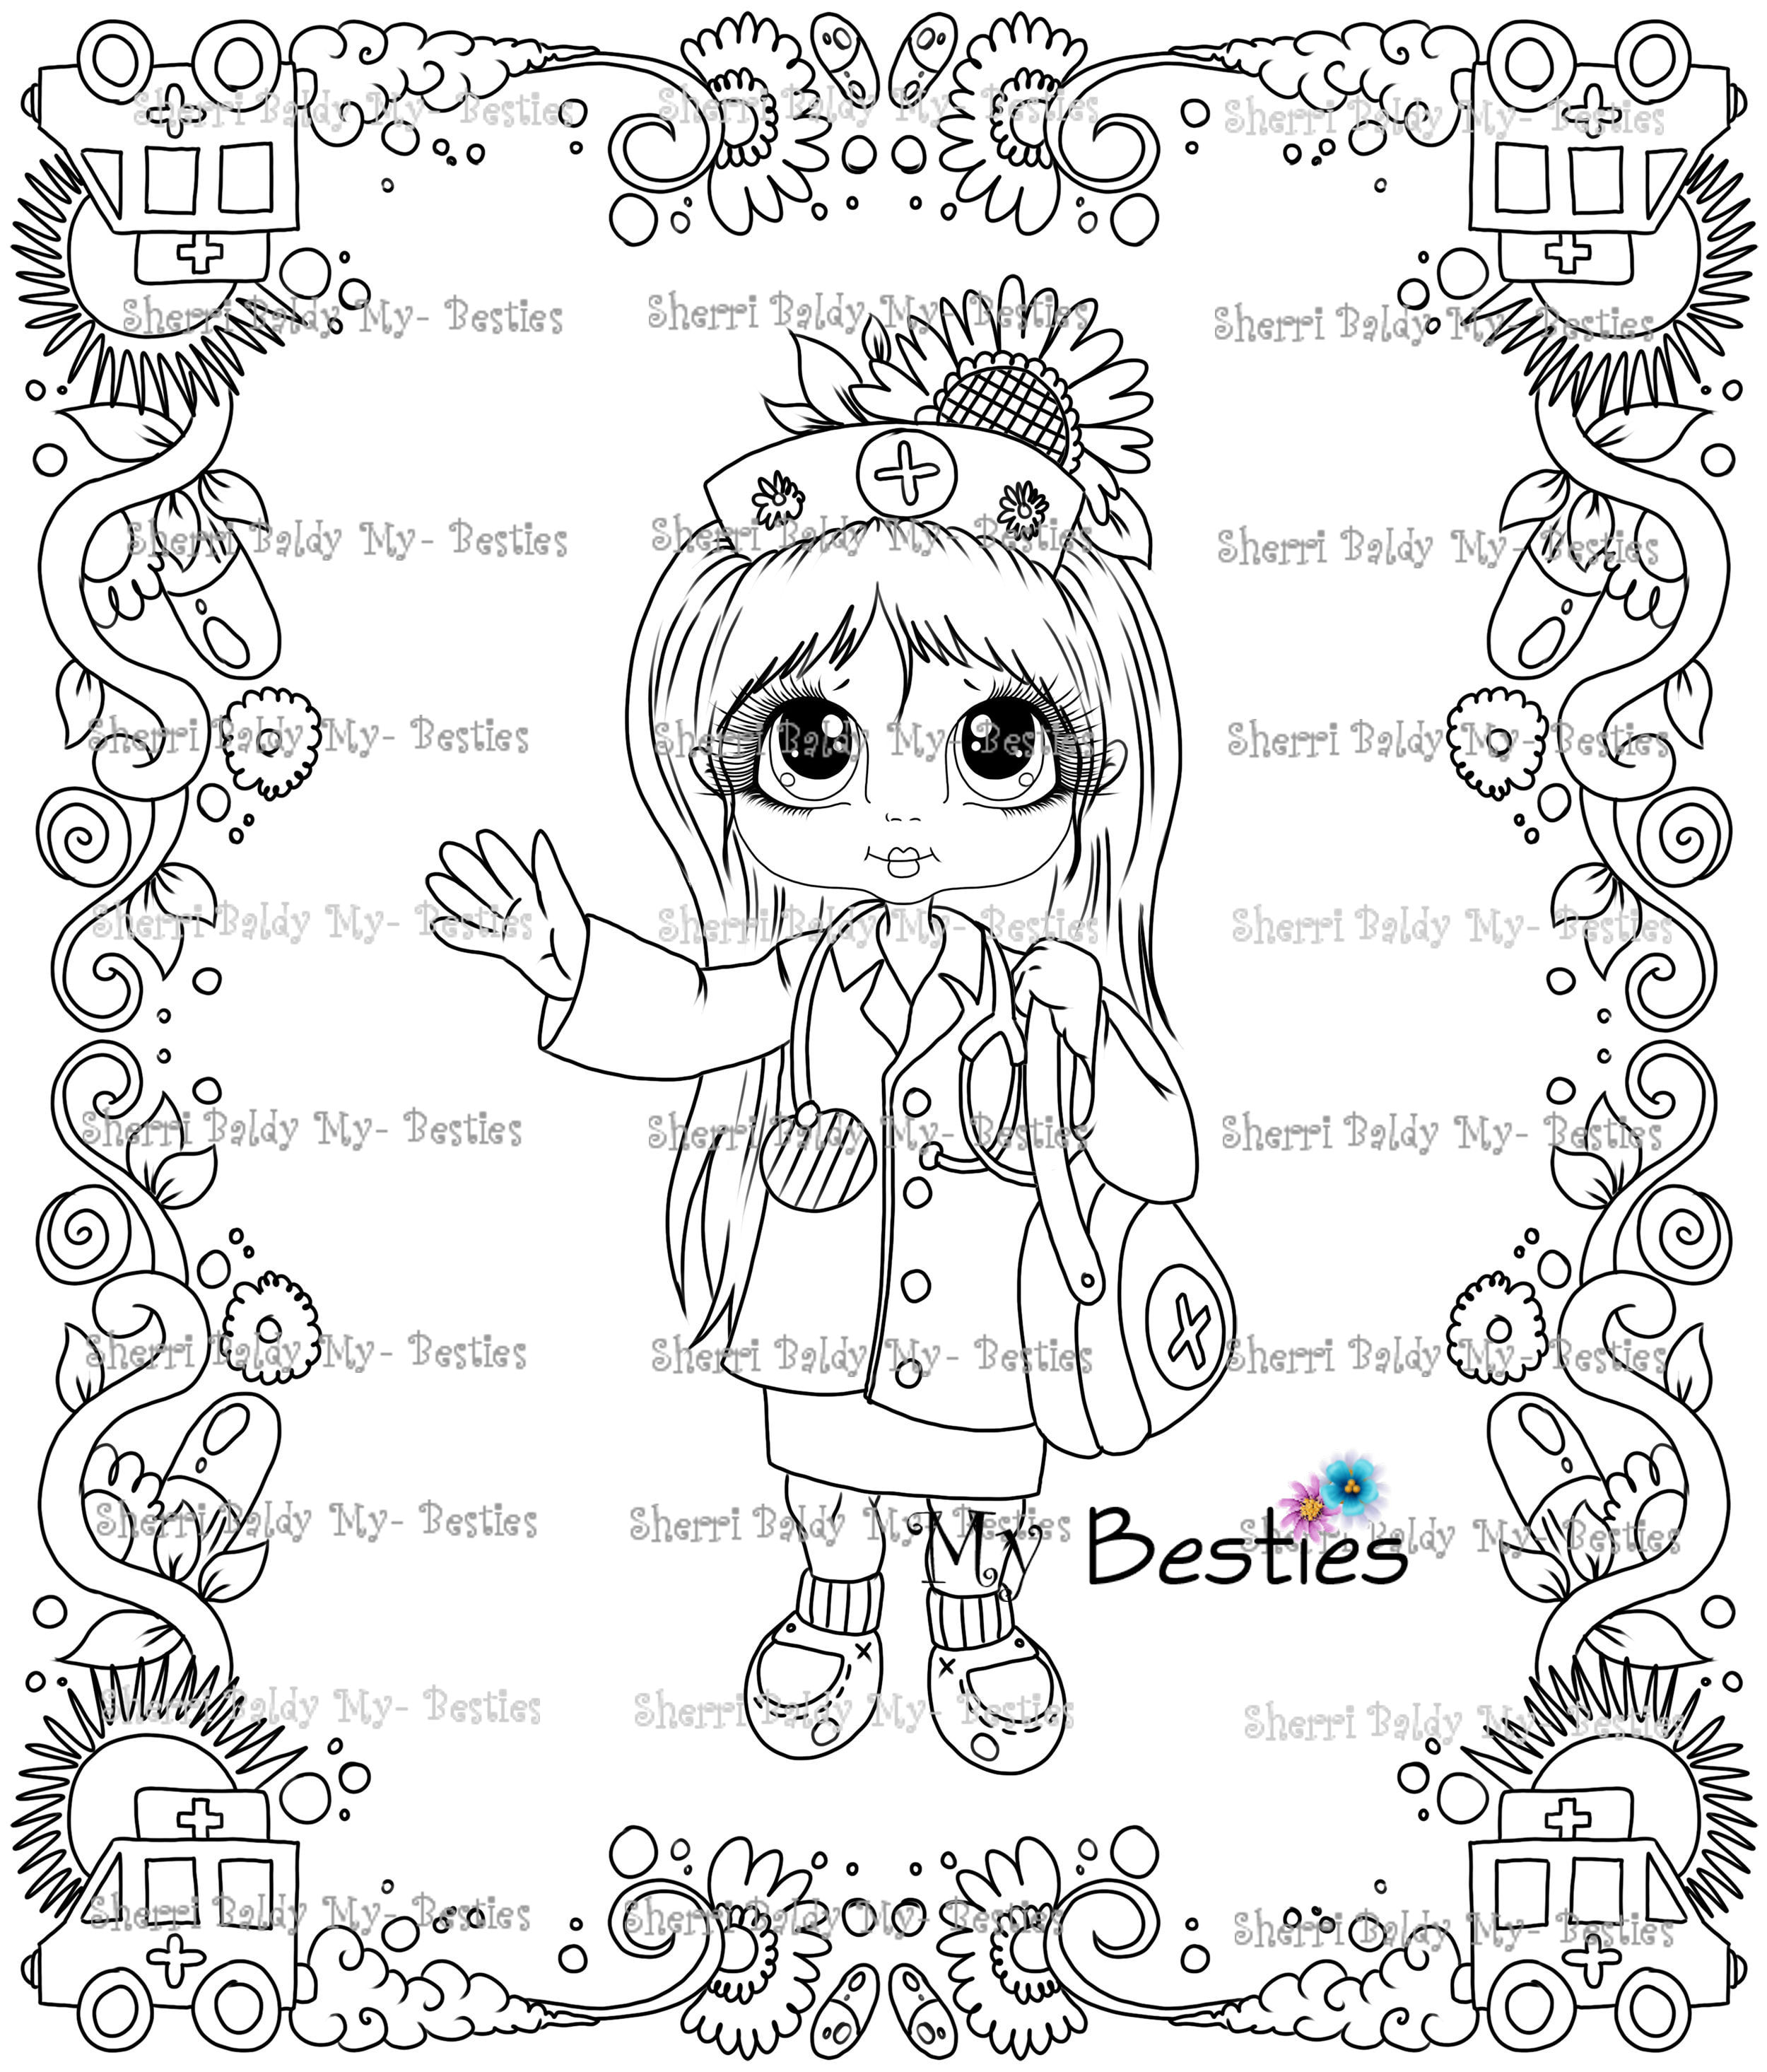 Download Instant Download My Besties Coloring Page Doll 12~Digi "Dr ~RX Nurse Get Well Besties" ~ My ...